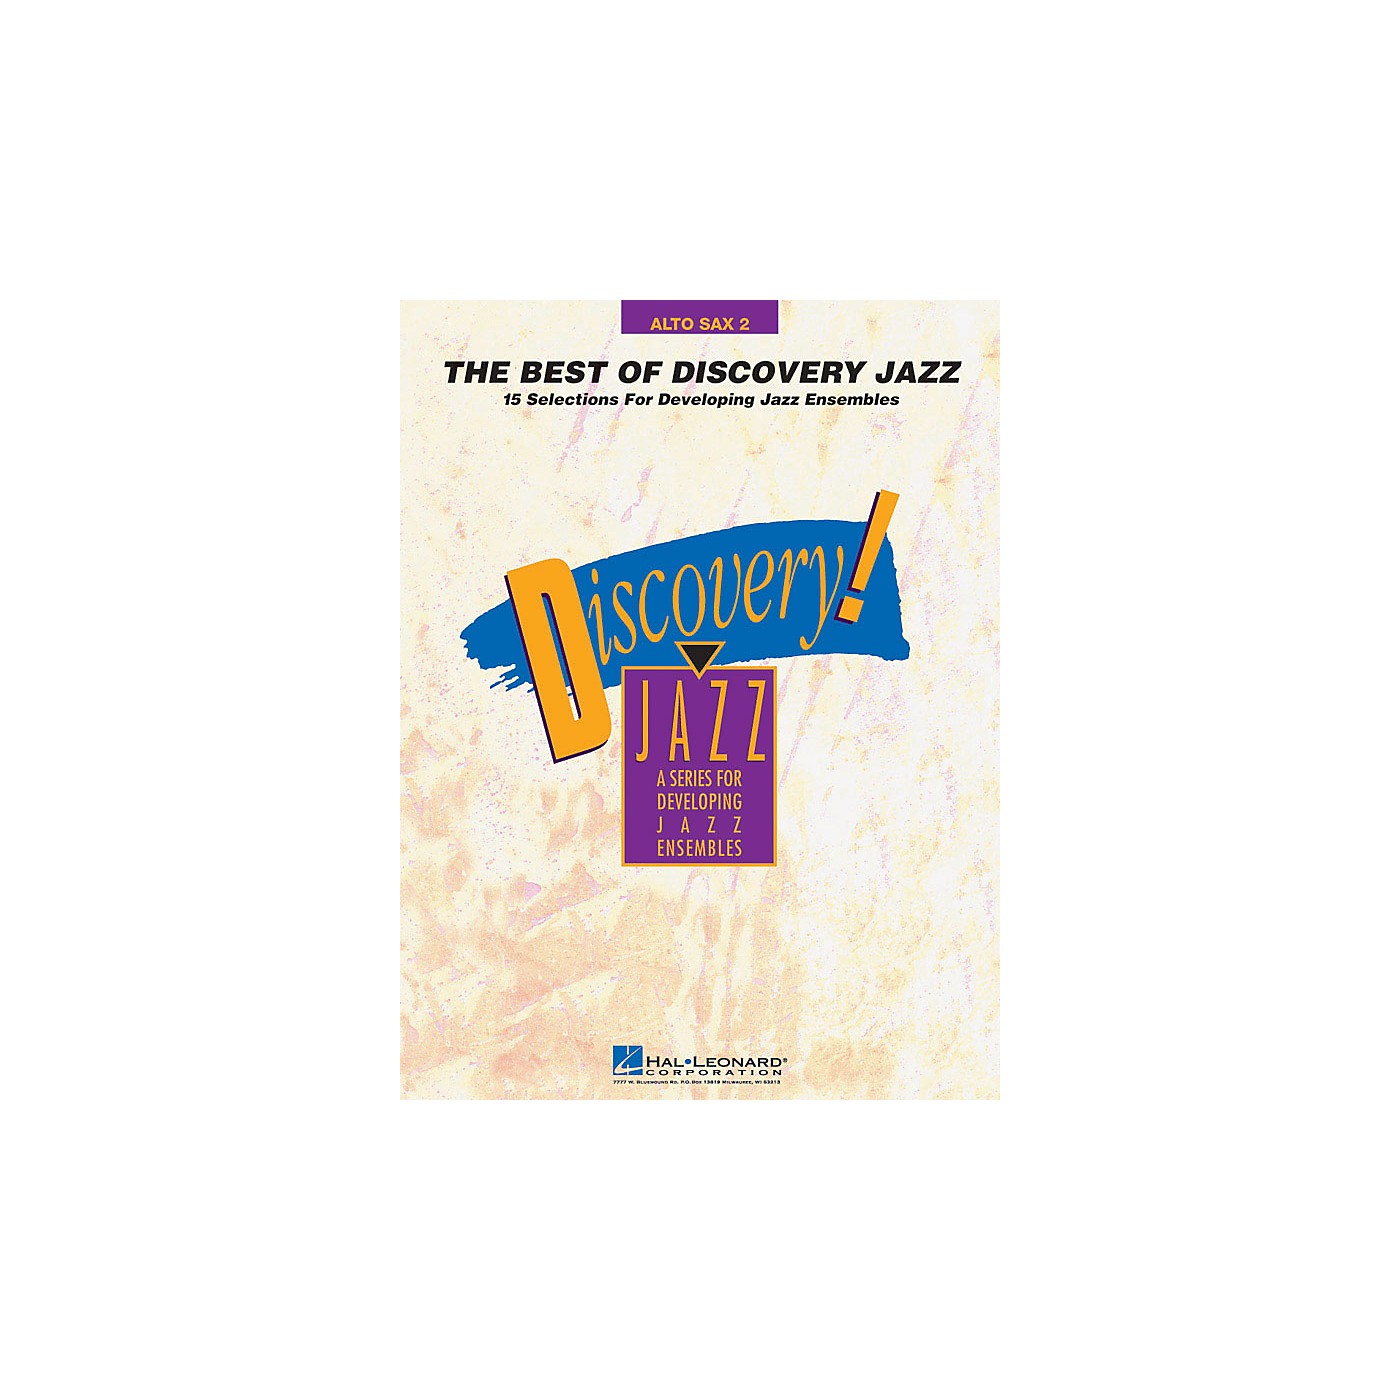 Hal Leonard The Best of Discovery Jazz (Alto Sax 2) Jazz Band Level 1-2 Composed by Various thumbnail